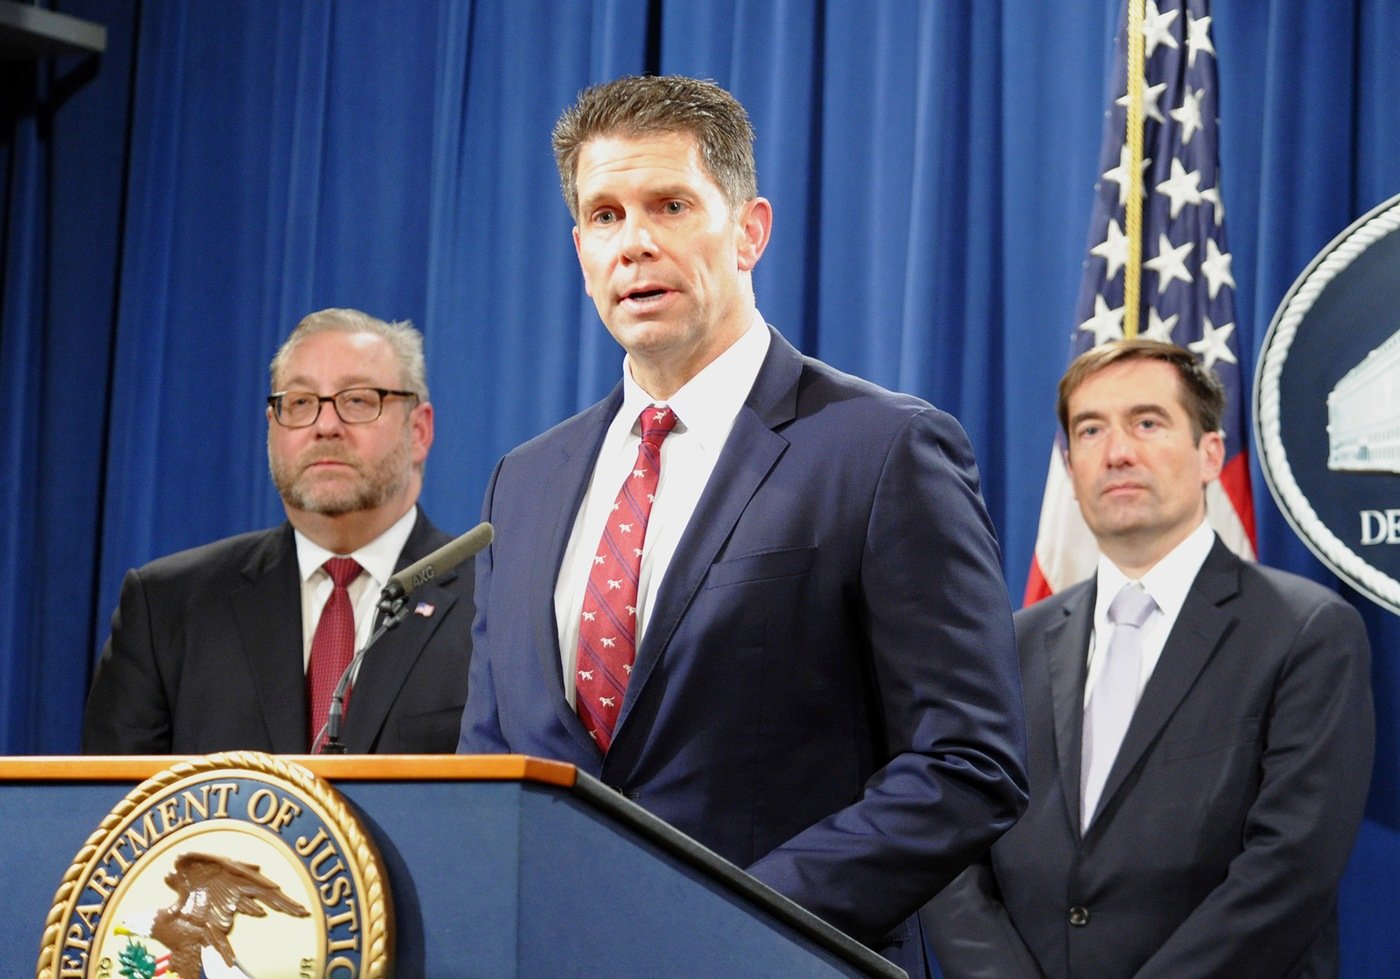 FBI Deputy Director David Bowdich answers questions during a press conference on countering Chinese economic espionage efforts. Standing behind Bowdich are Assistant Attorney General for the Criminal Division Brian A. Benczkowski and Assistant Attorney General for National Security John Demers.